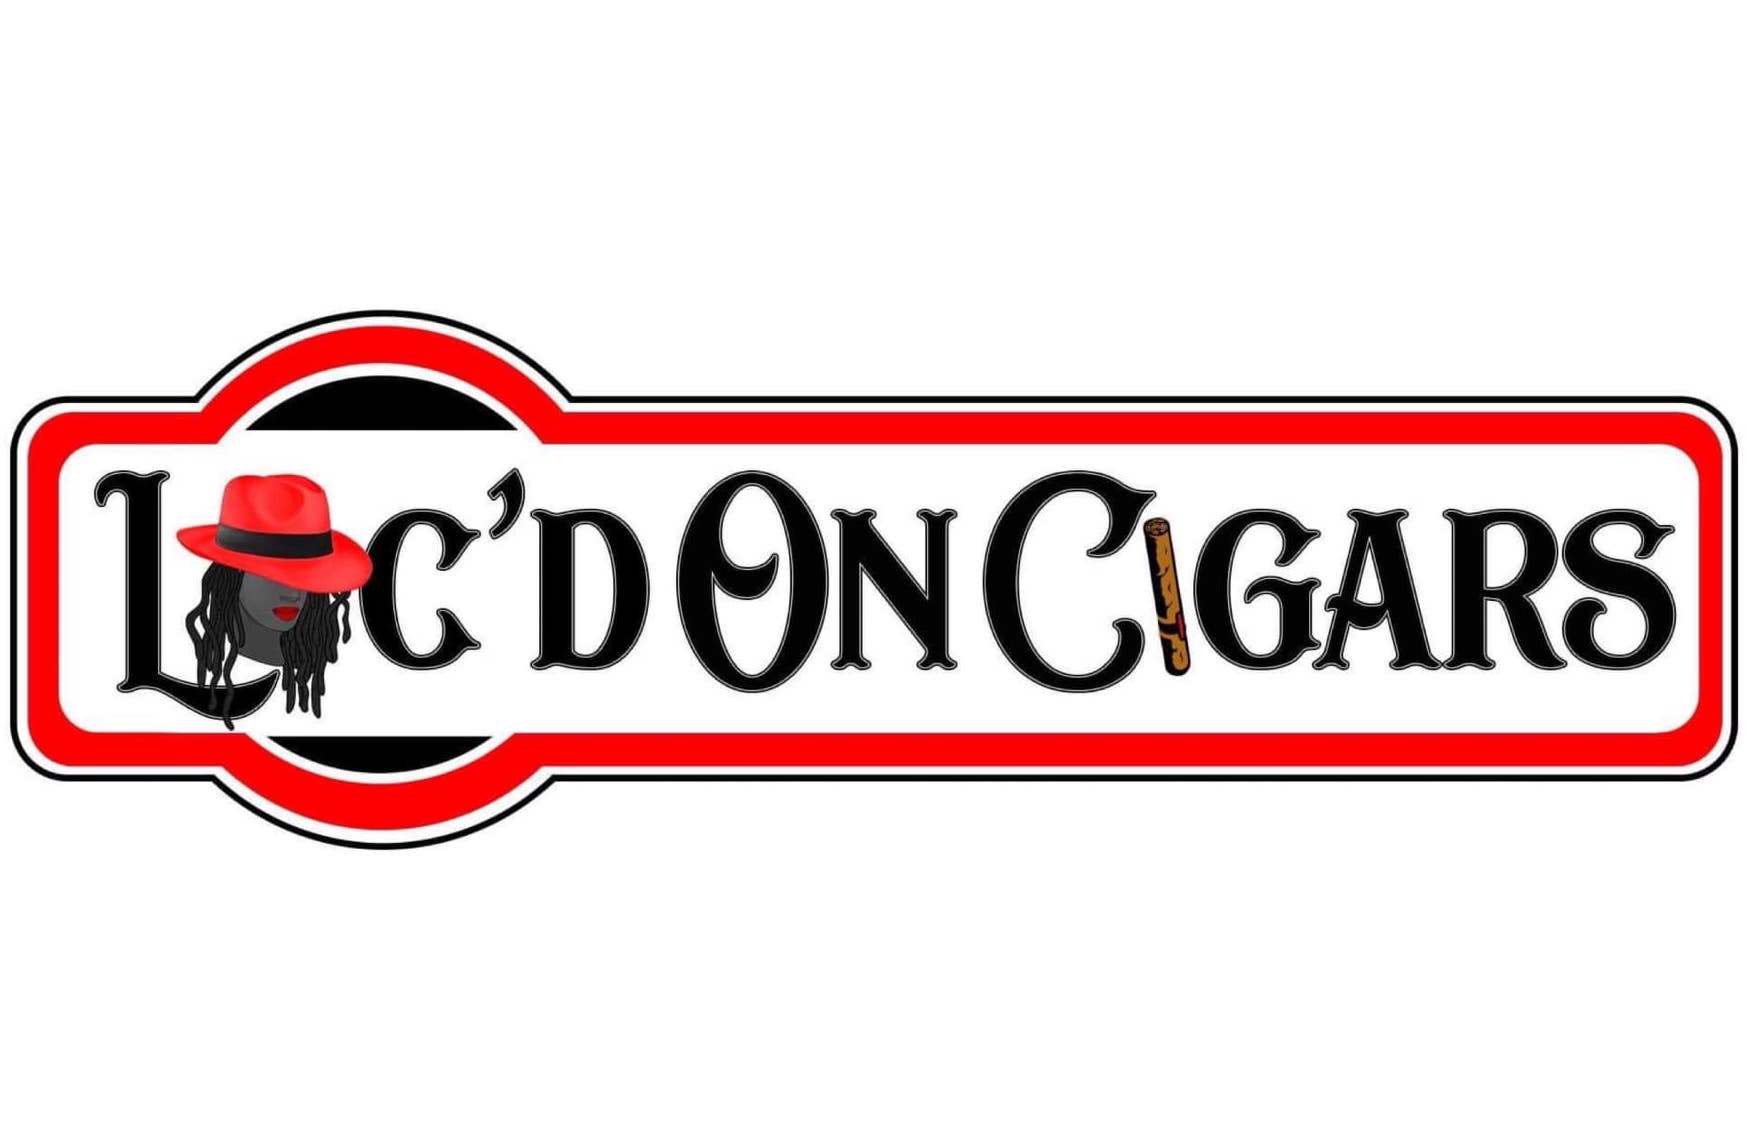 Loc'd On Cigars - Black Owned